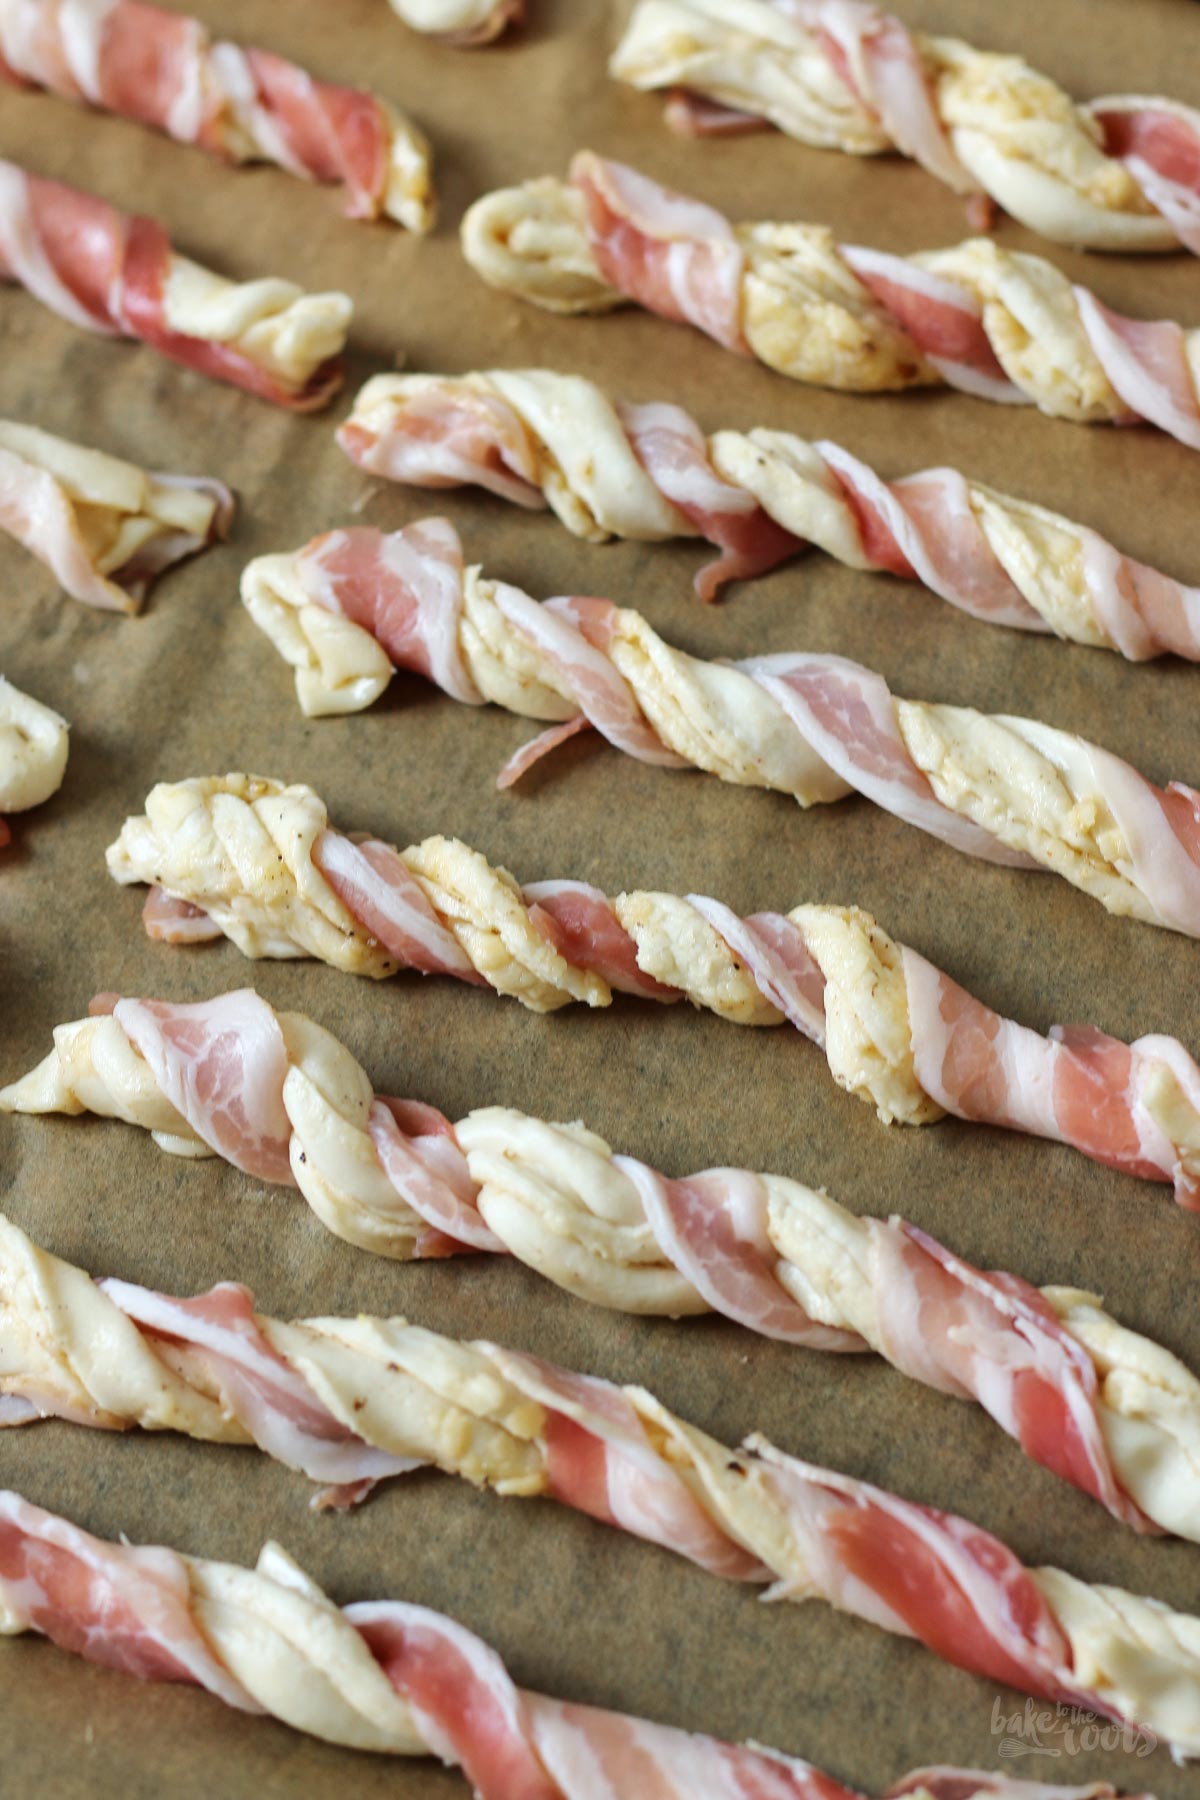 Cheesy Bacon Wrapped Puff Pastry Sticks | Bake to the roots